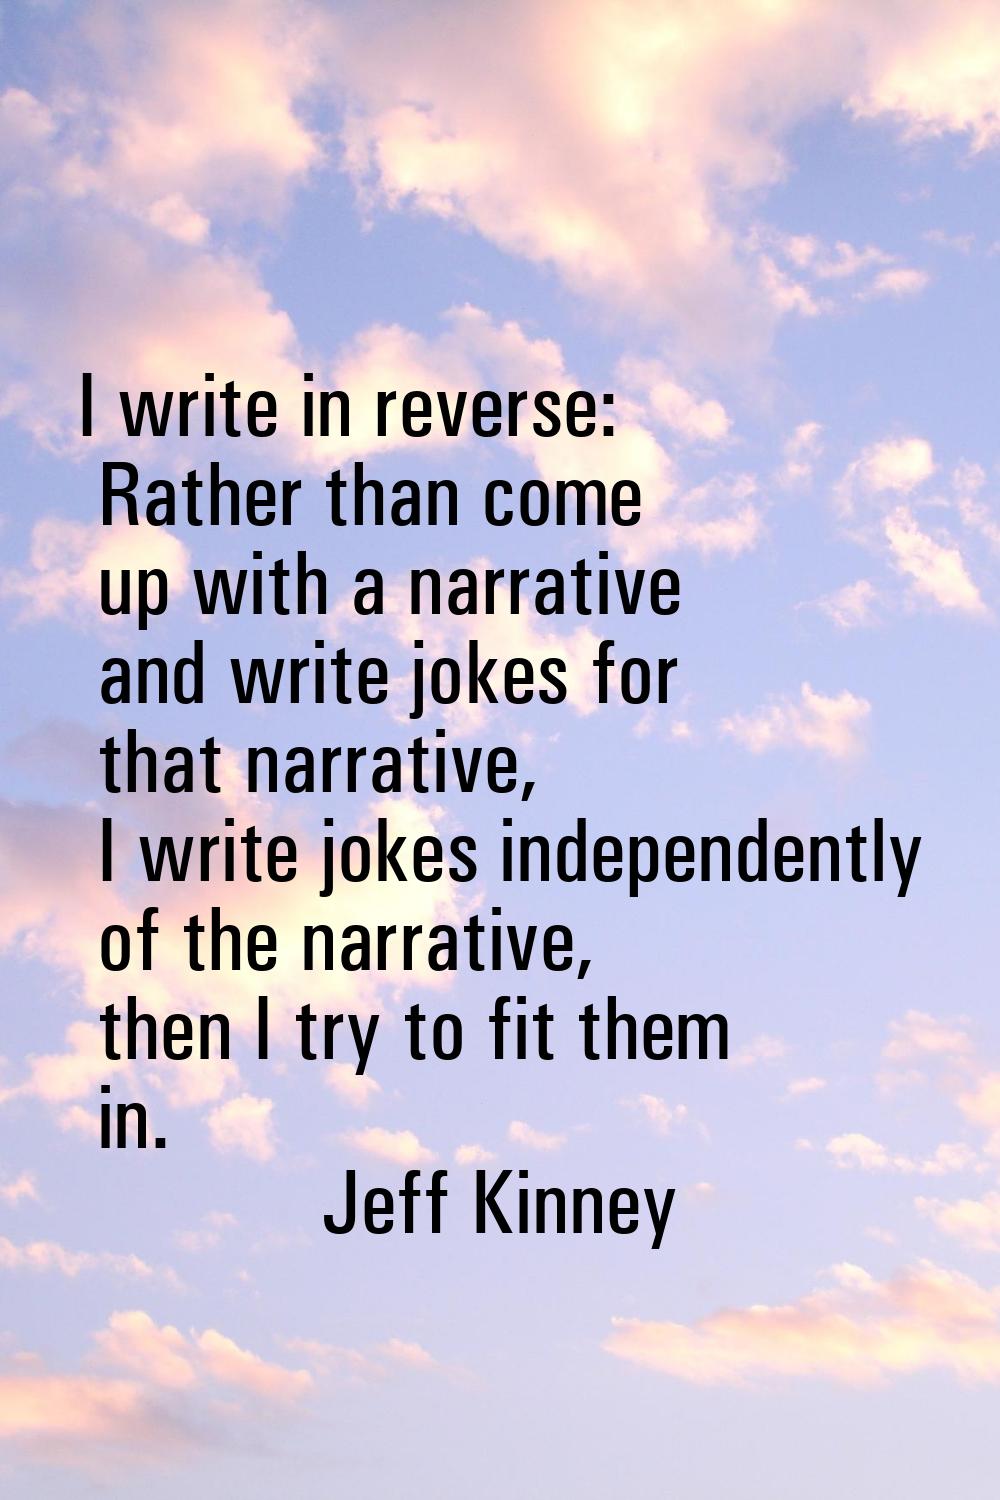 I write in reverse: Rather than come up with a narrative and write jokes for that narrative, I writ